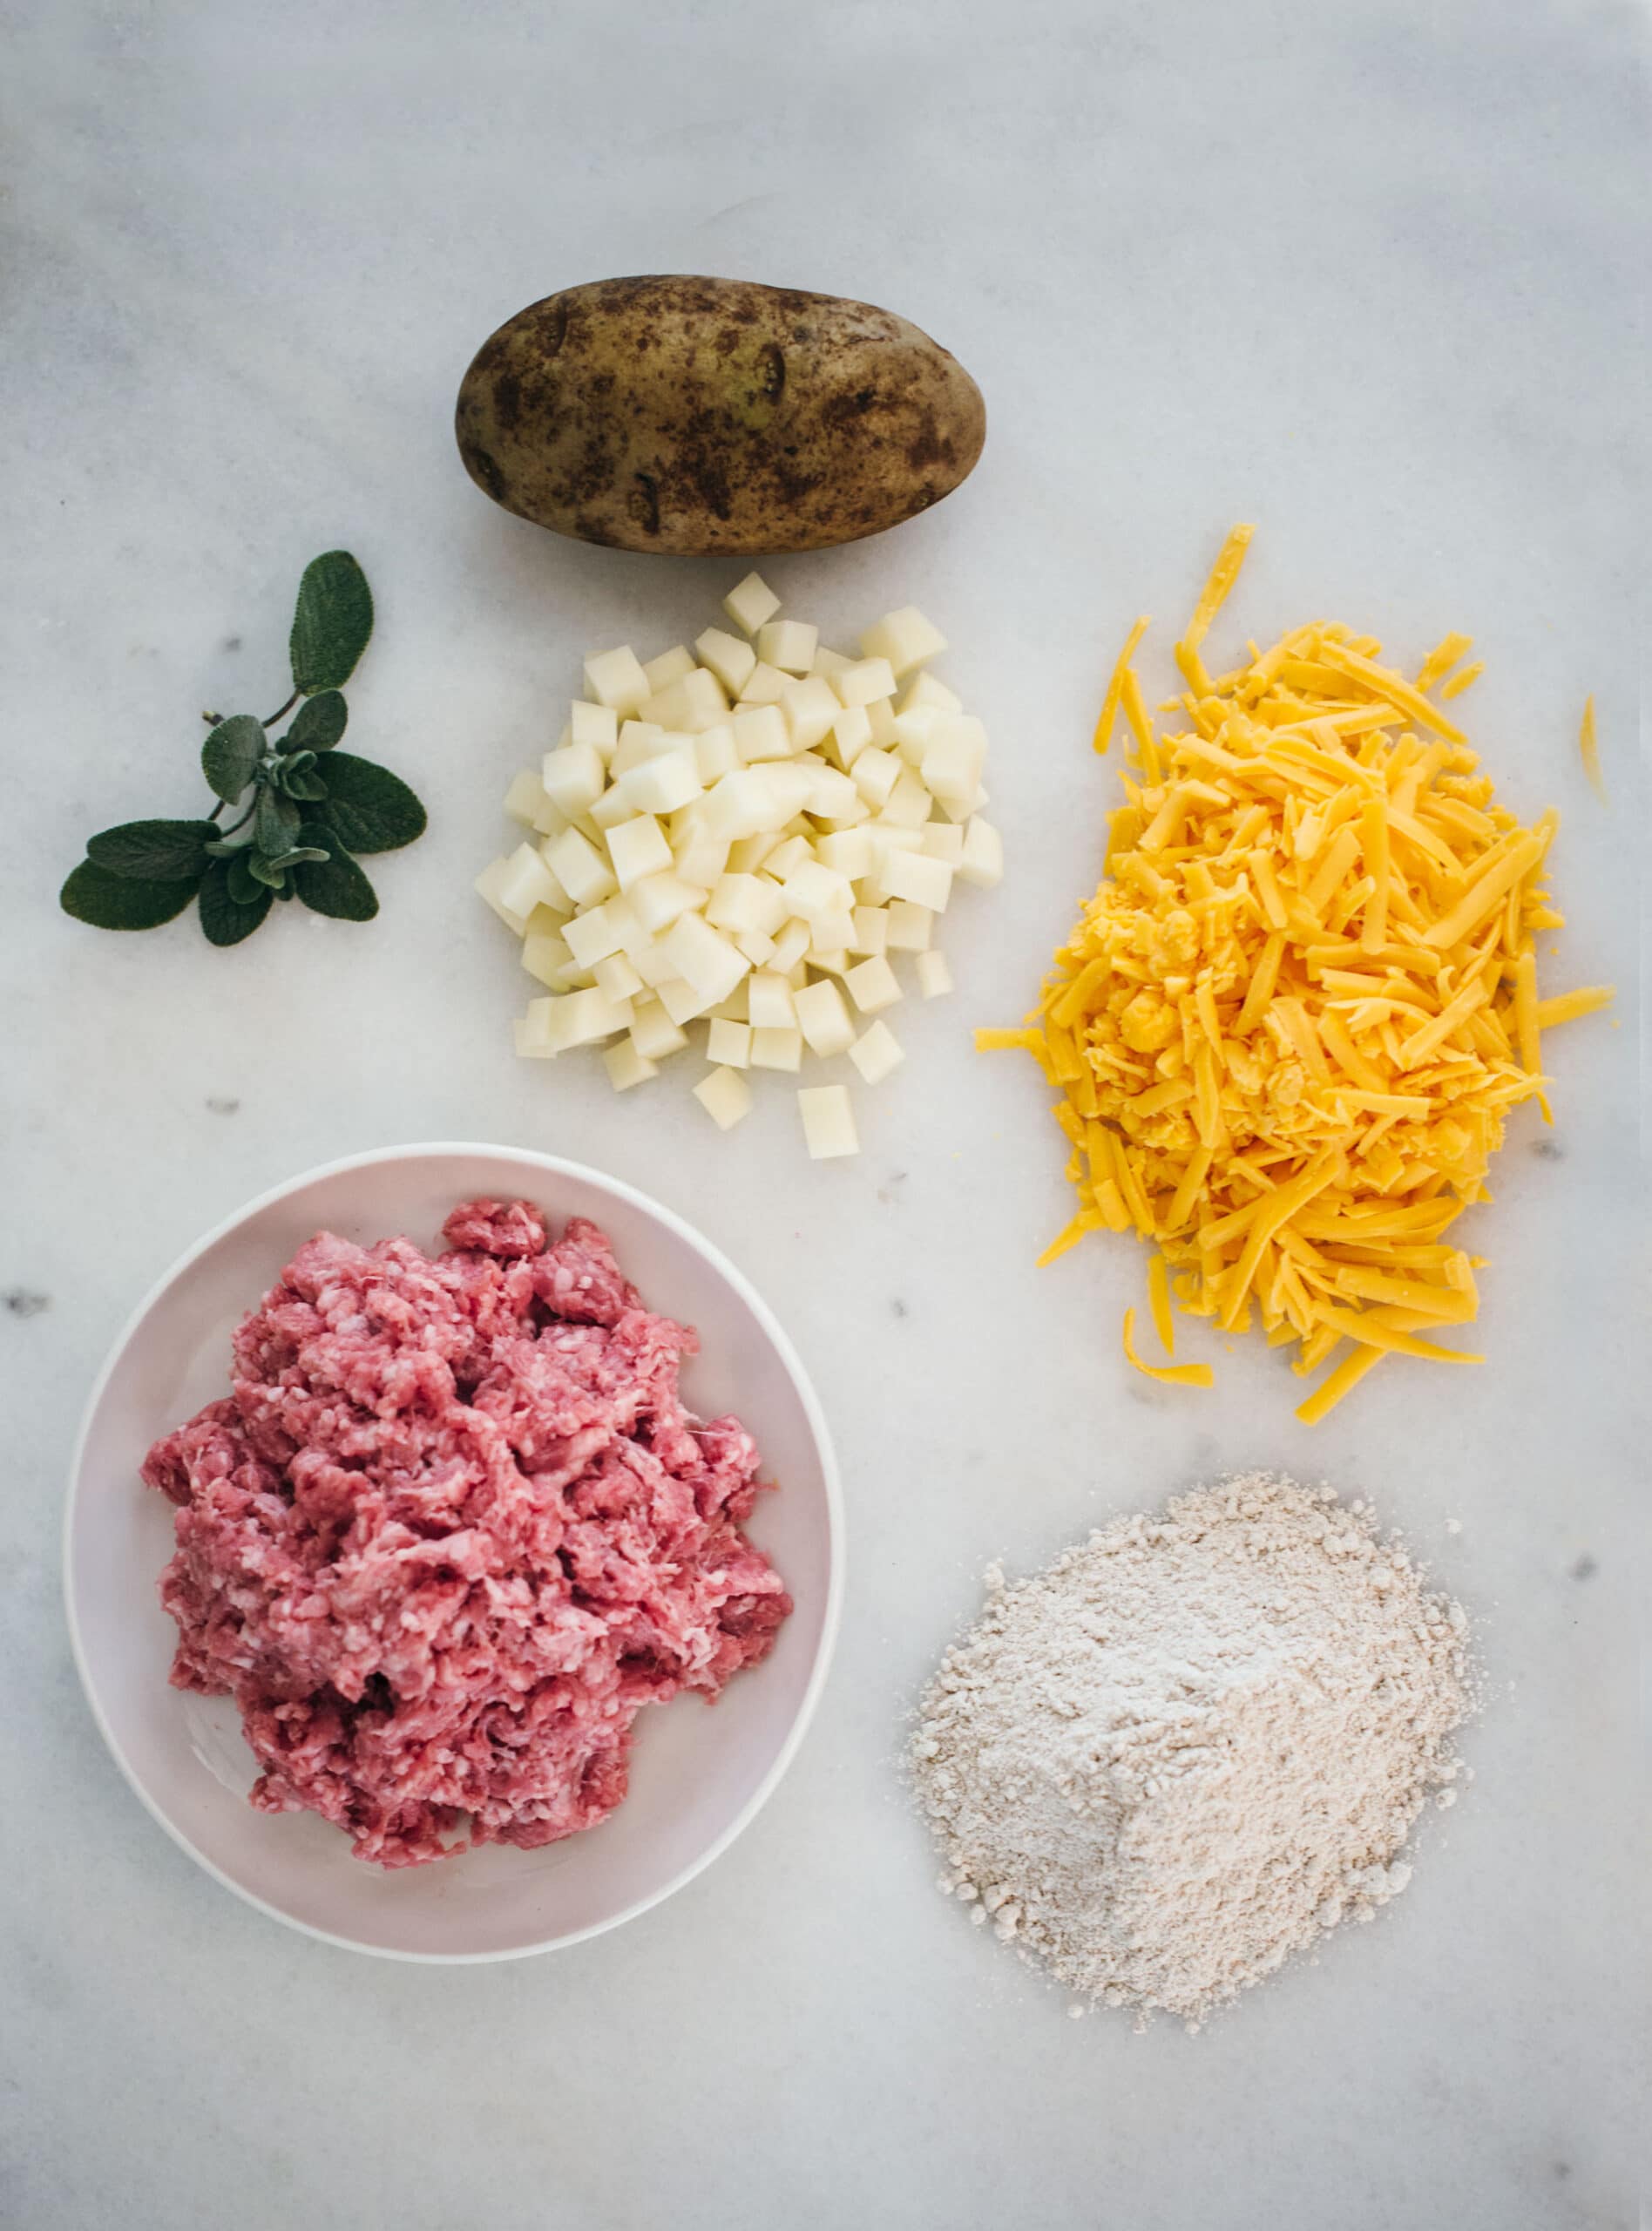 Ingredients for dog treats, sausage cheese balls